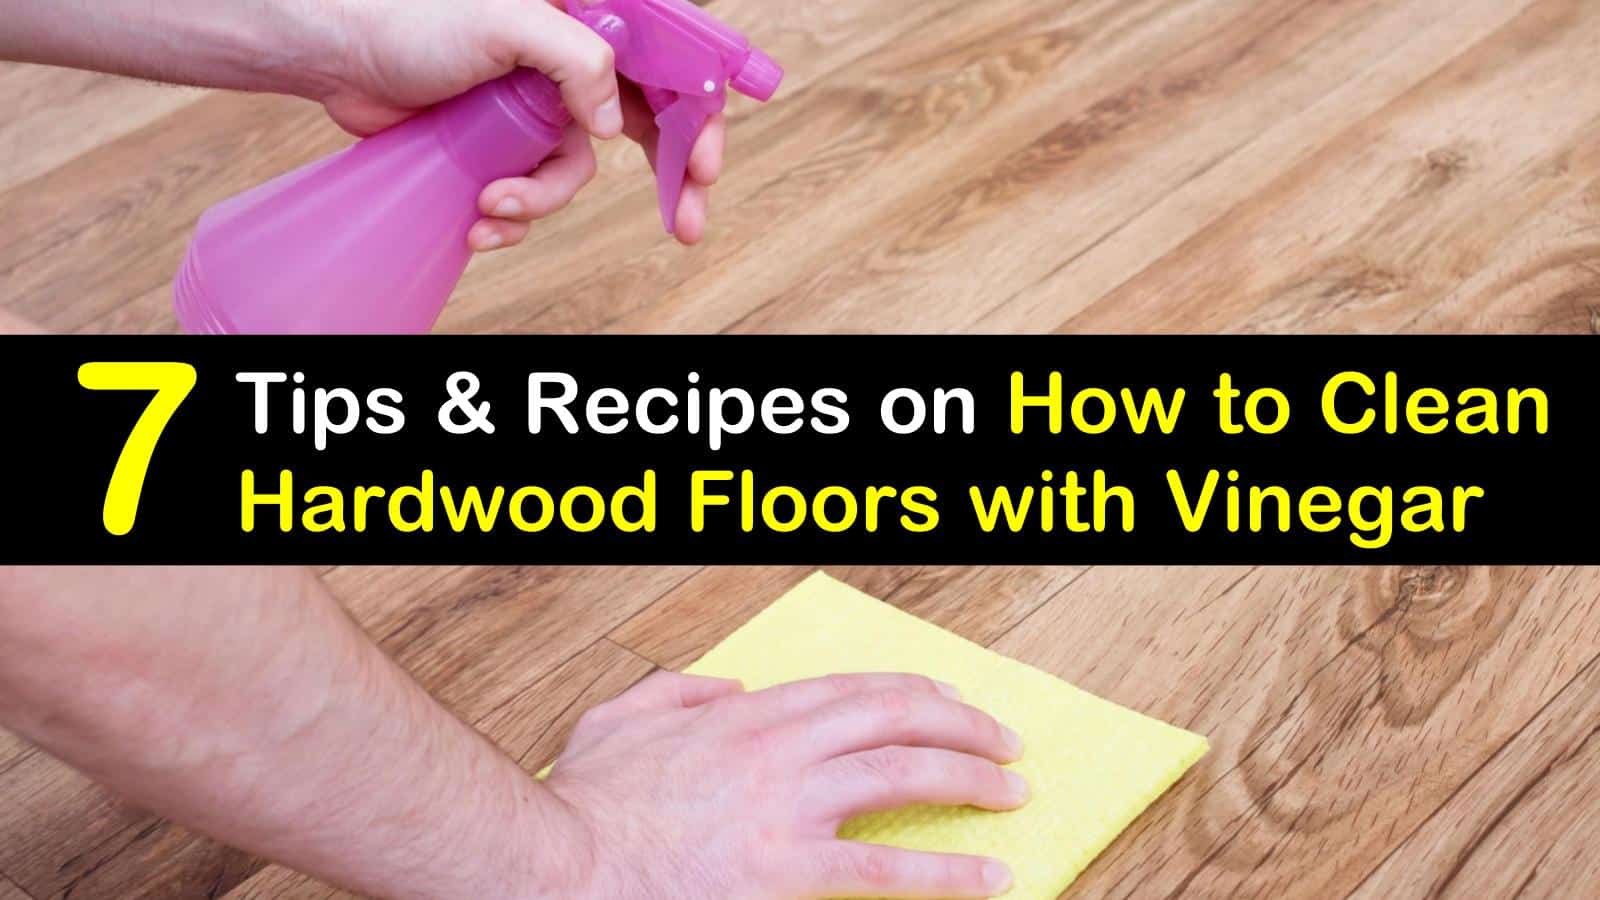 To Clean Hardwood Floors With Vinegar, How To Clean Laminate Floors With Vinegar